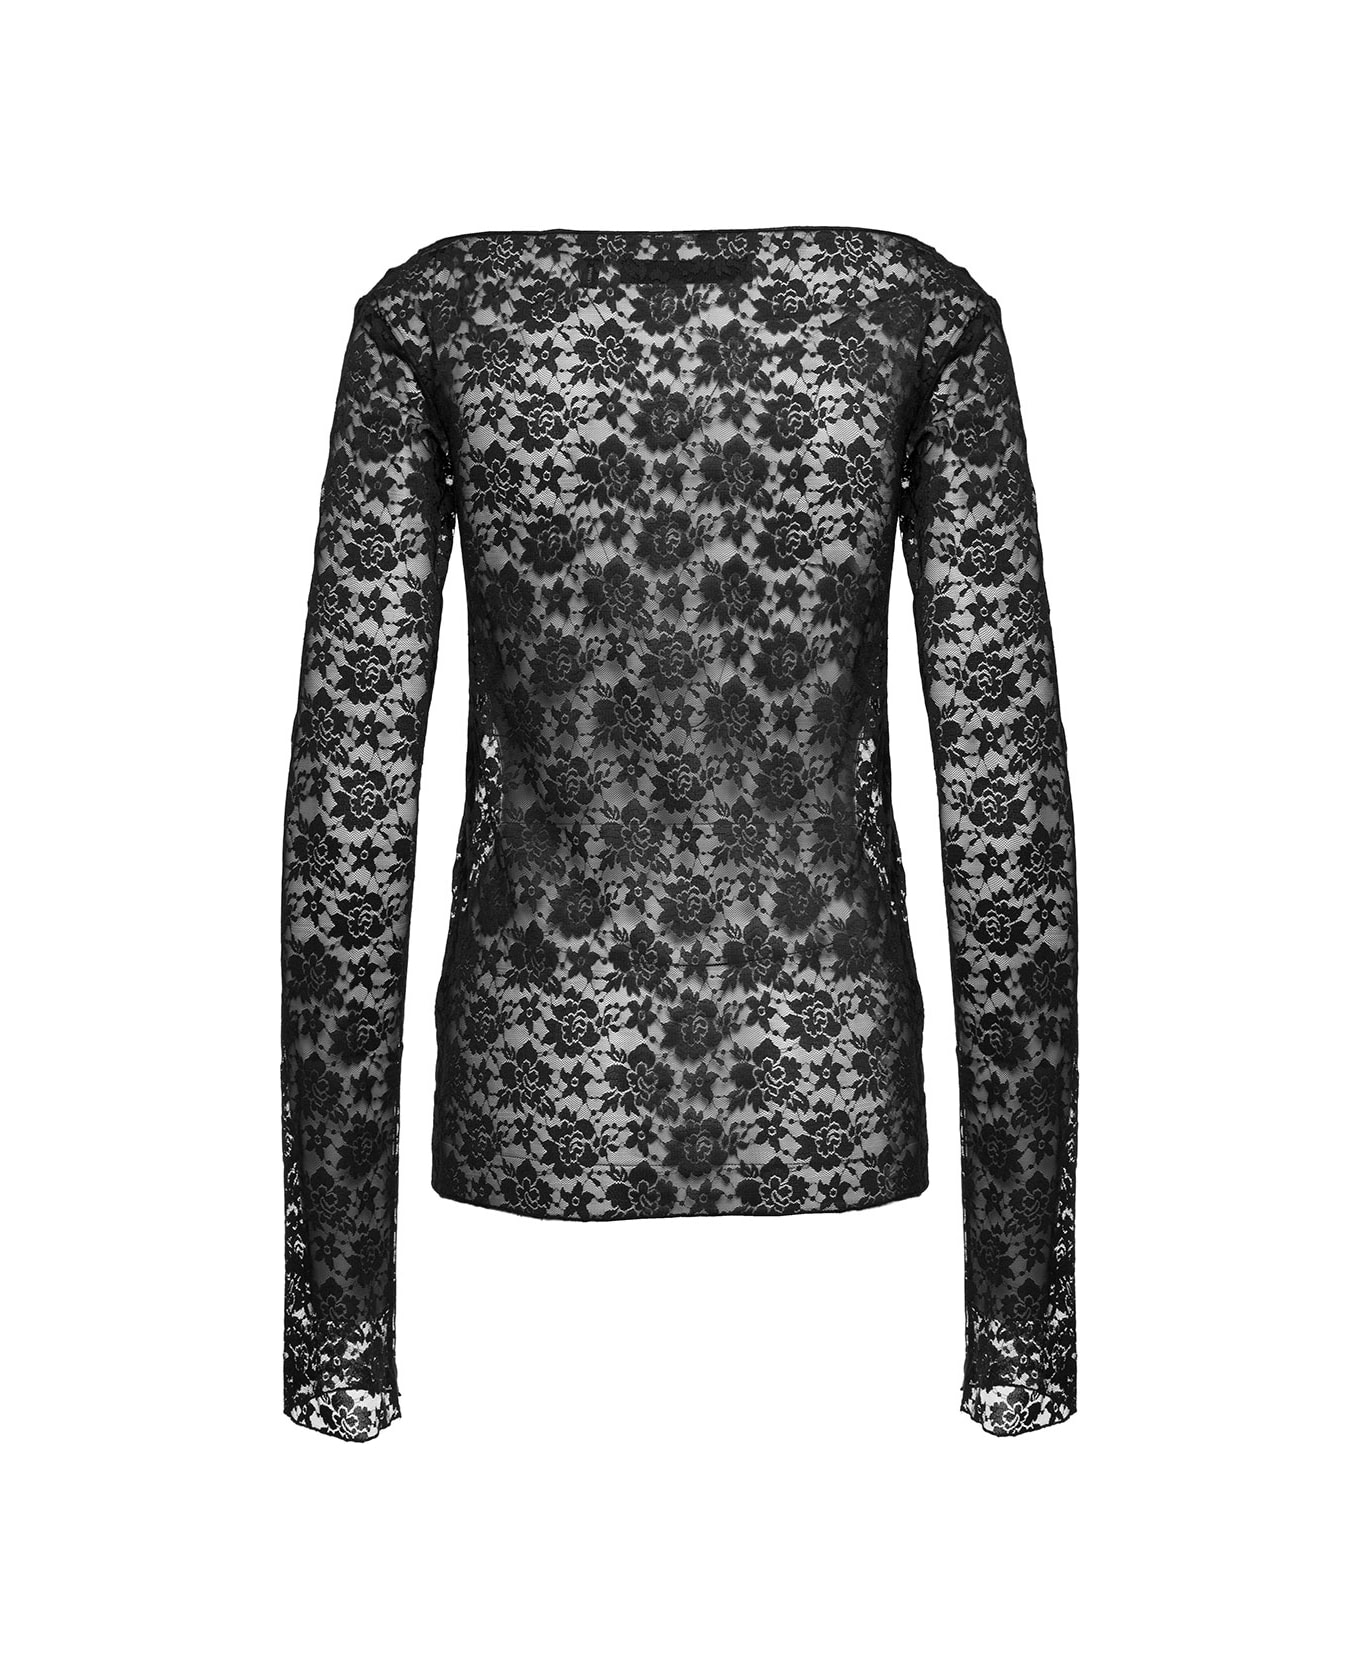 Rotate by Birger Christensen Black Long Sleeve Top With Boat Neckine In Lace Woman - Black